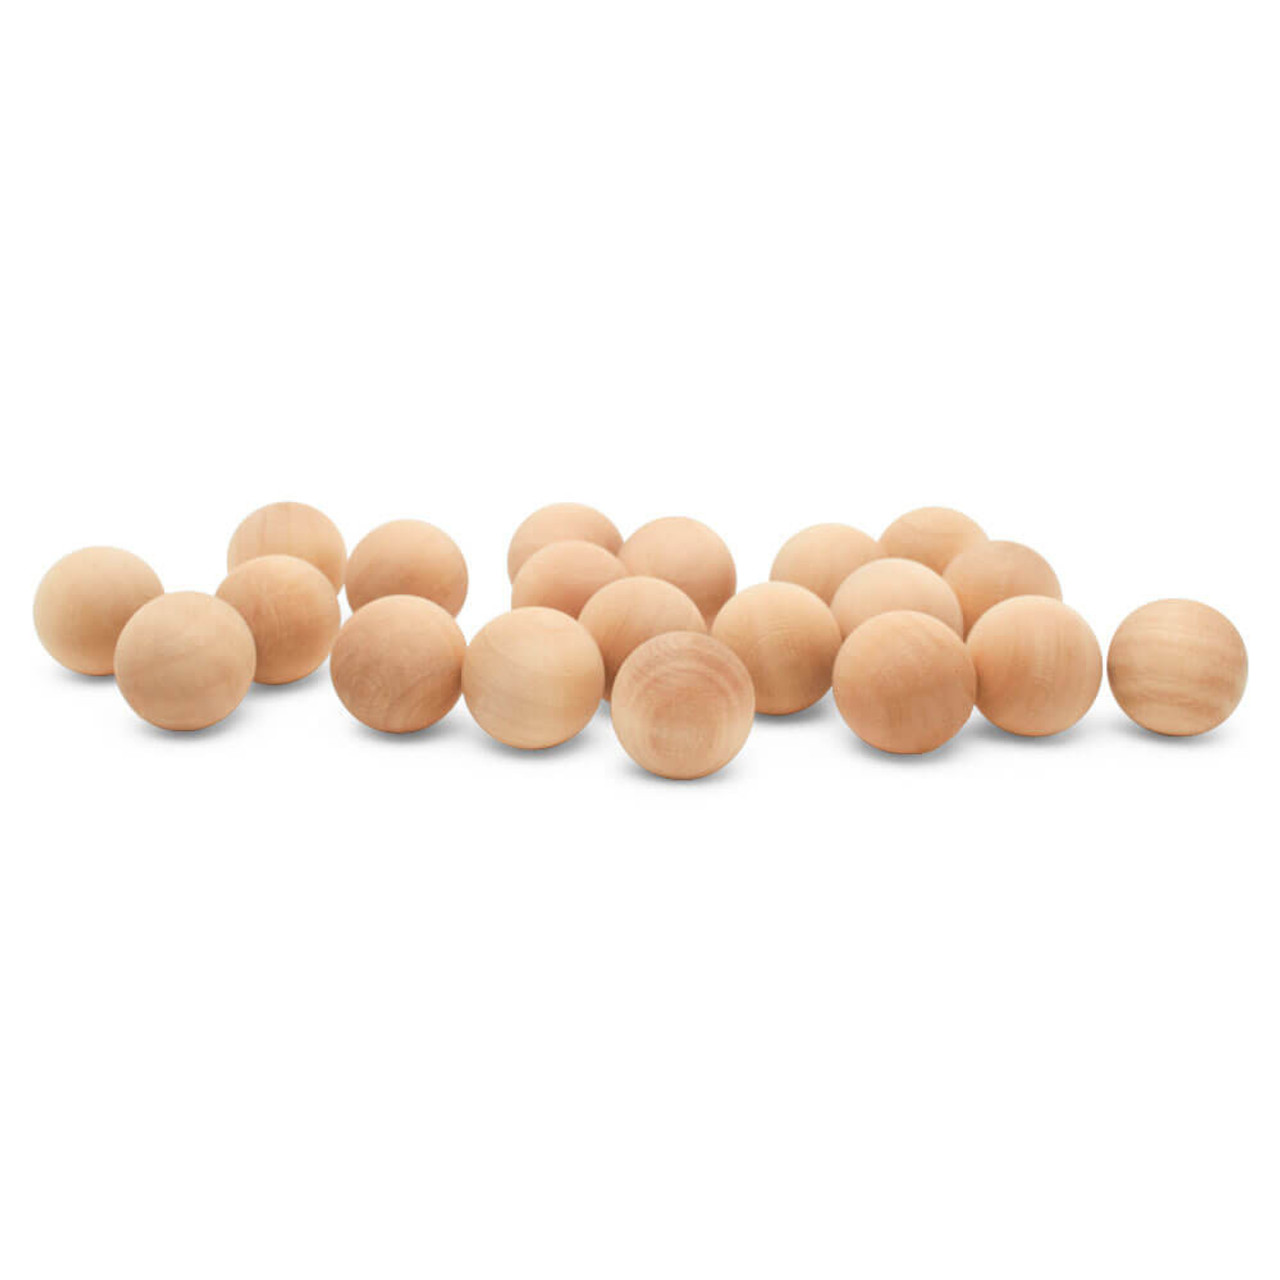 Craft County 7/8 Inch Wooden Balls â€“ for Arts and Crafts Projects (5 Pack)